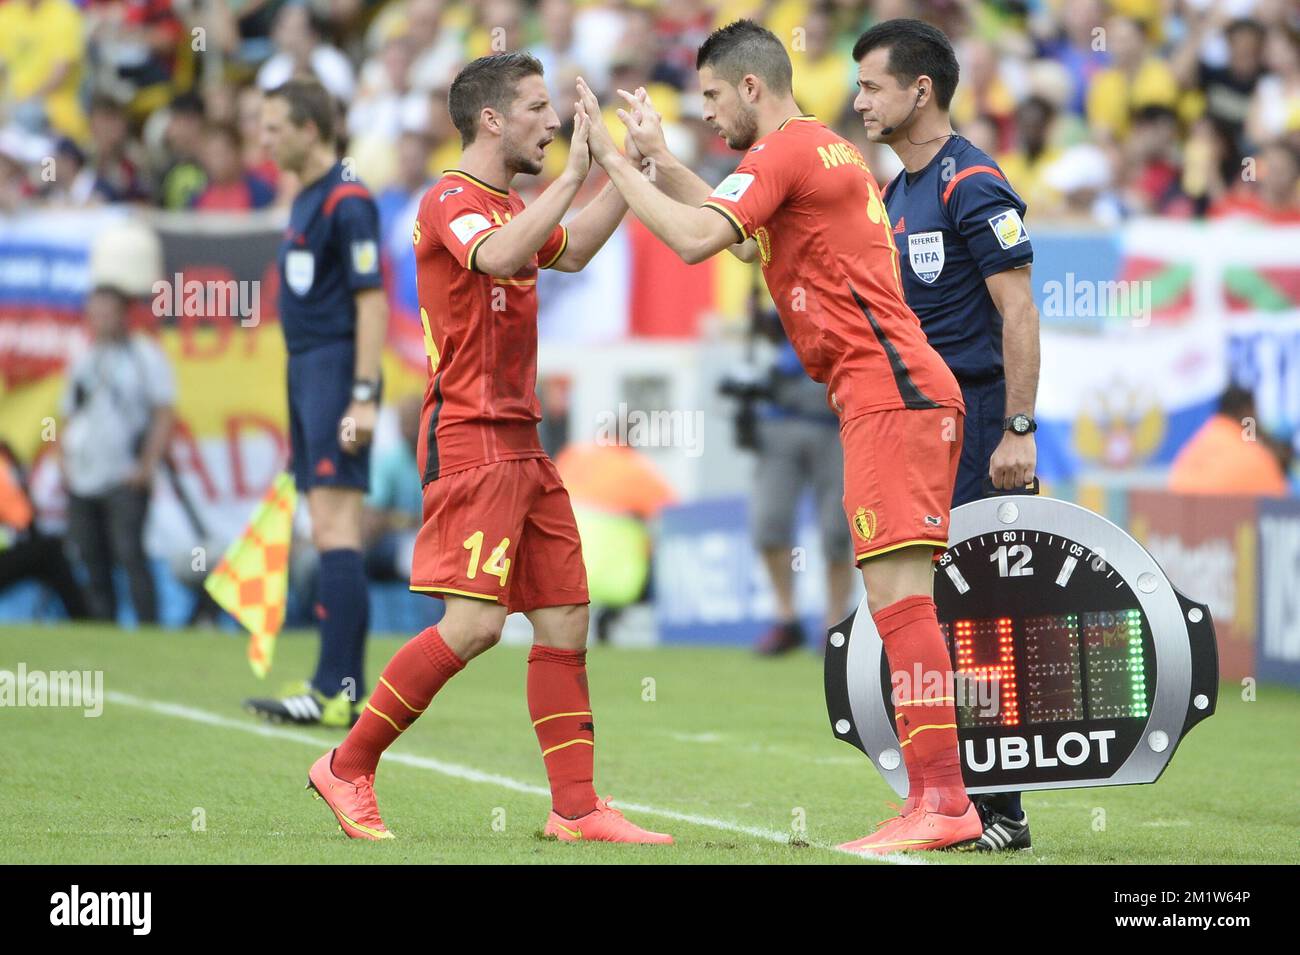 20140622 - RIO DE JANEIRO, BRAZIL: Belgium's Dries Mertens leaves and is replaced by Belgium's Kevin Mirallas at a soccer game between Belgian national team The Red Devils and Russia in Rio de Janeiro, Brazil, the second game in Group H of the first round of the 2014 FIFA World Cup, Sunday 22 June 2014.   BELGA PHOTO DIRK WAEM Stock Photo